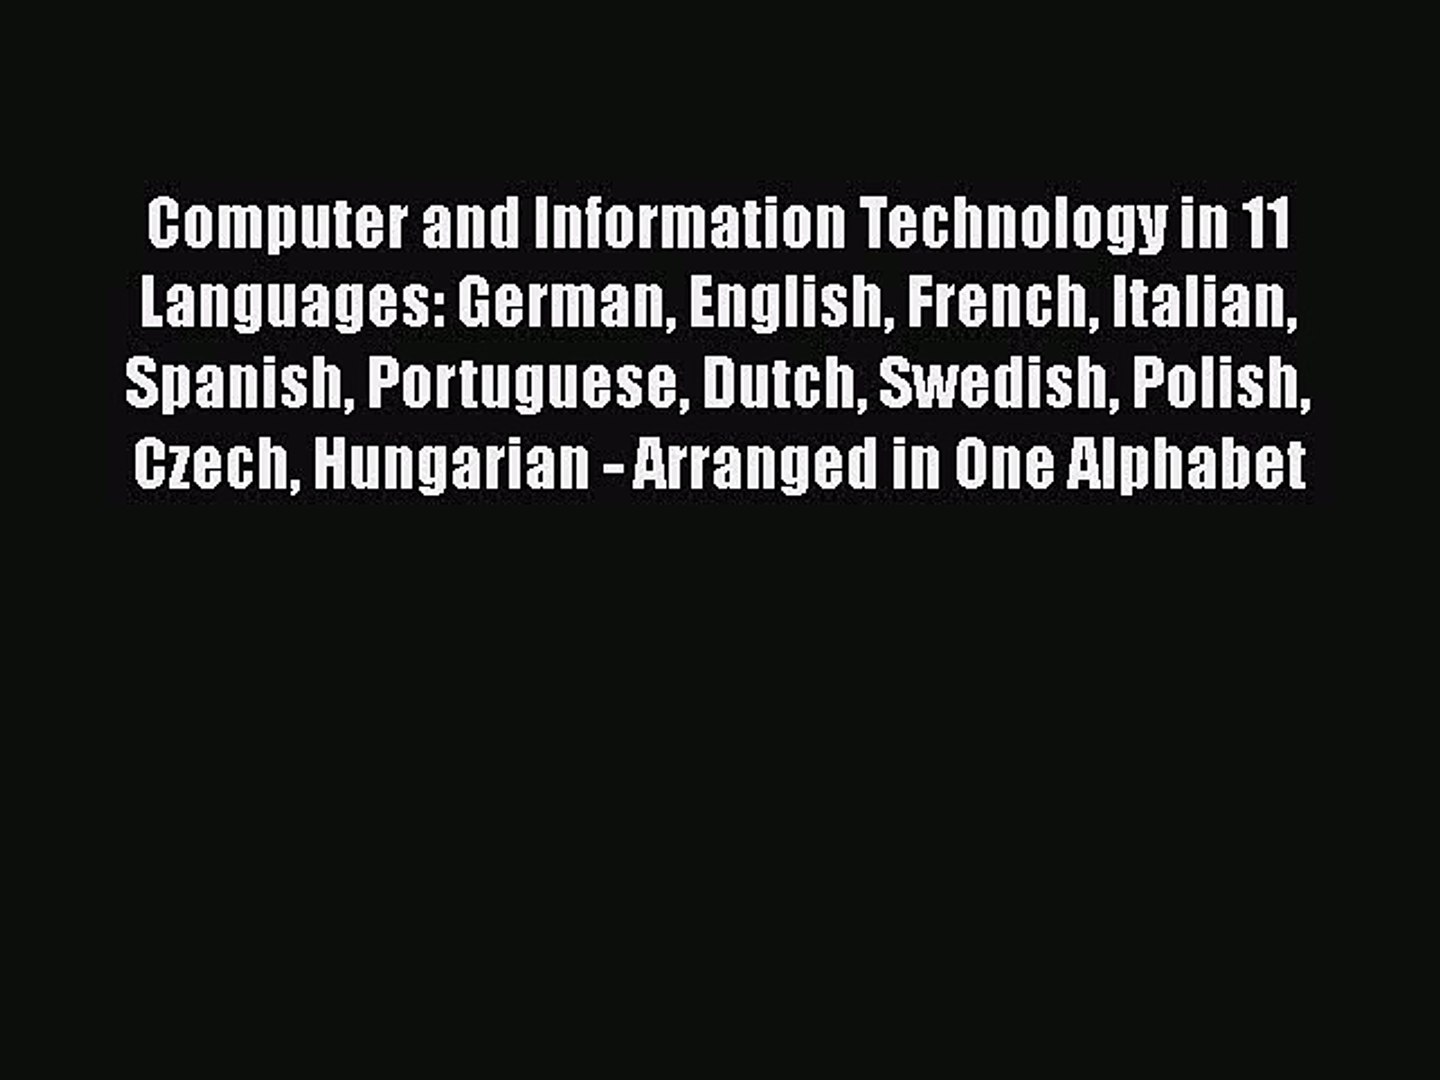 [PDF] Computer and Information Technology in 11 Languages: German English French Italian Spanish